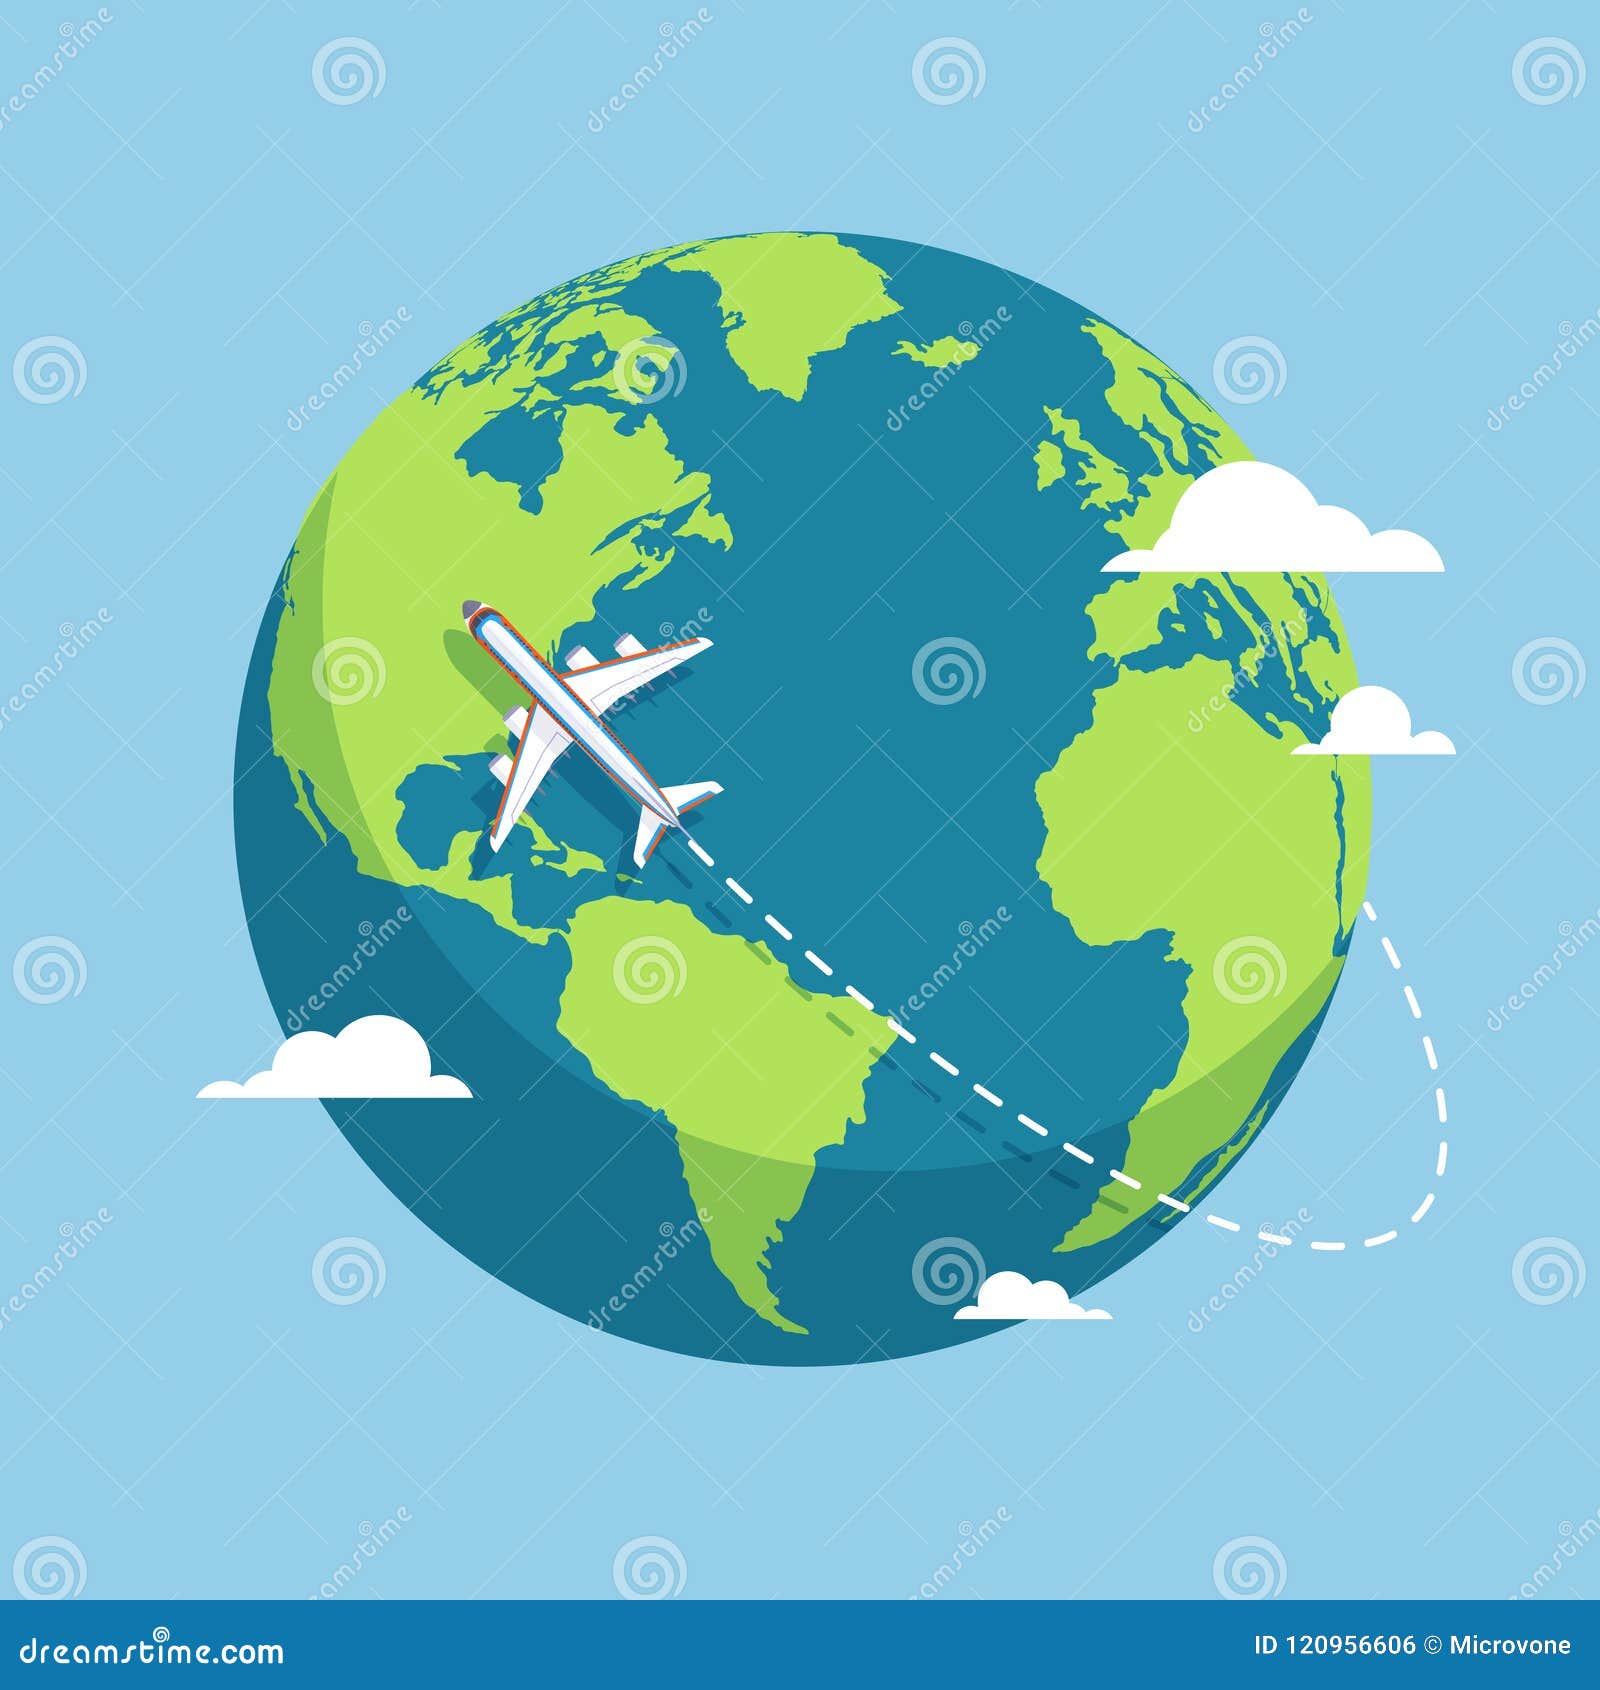 Plane and Globe. Aircraft Flying Around Earth Planet with Continents ...